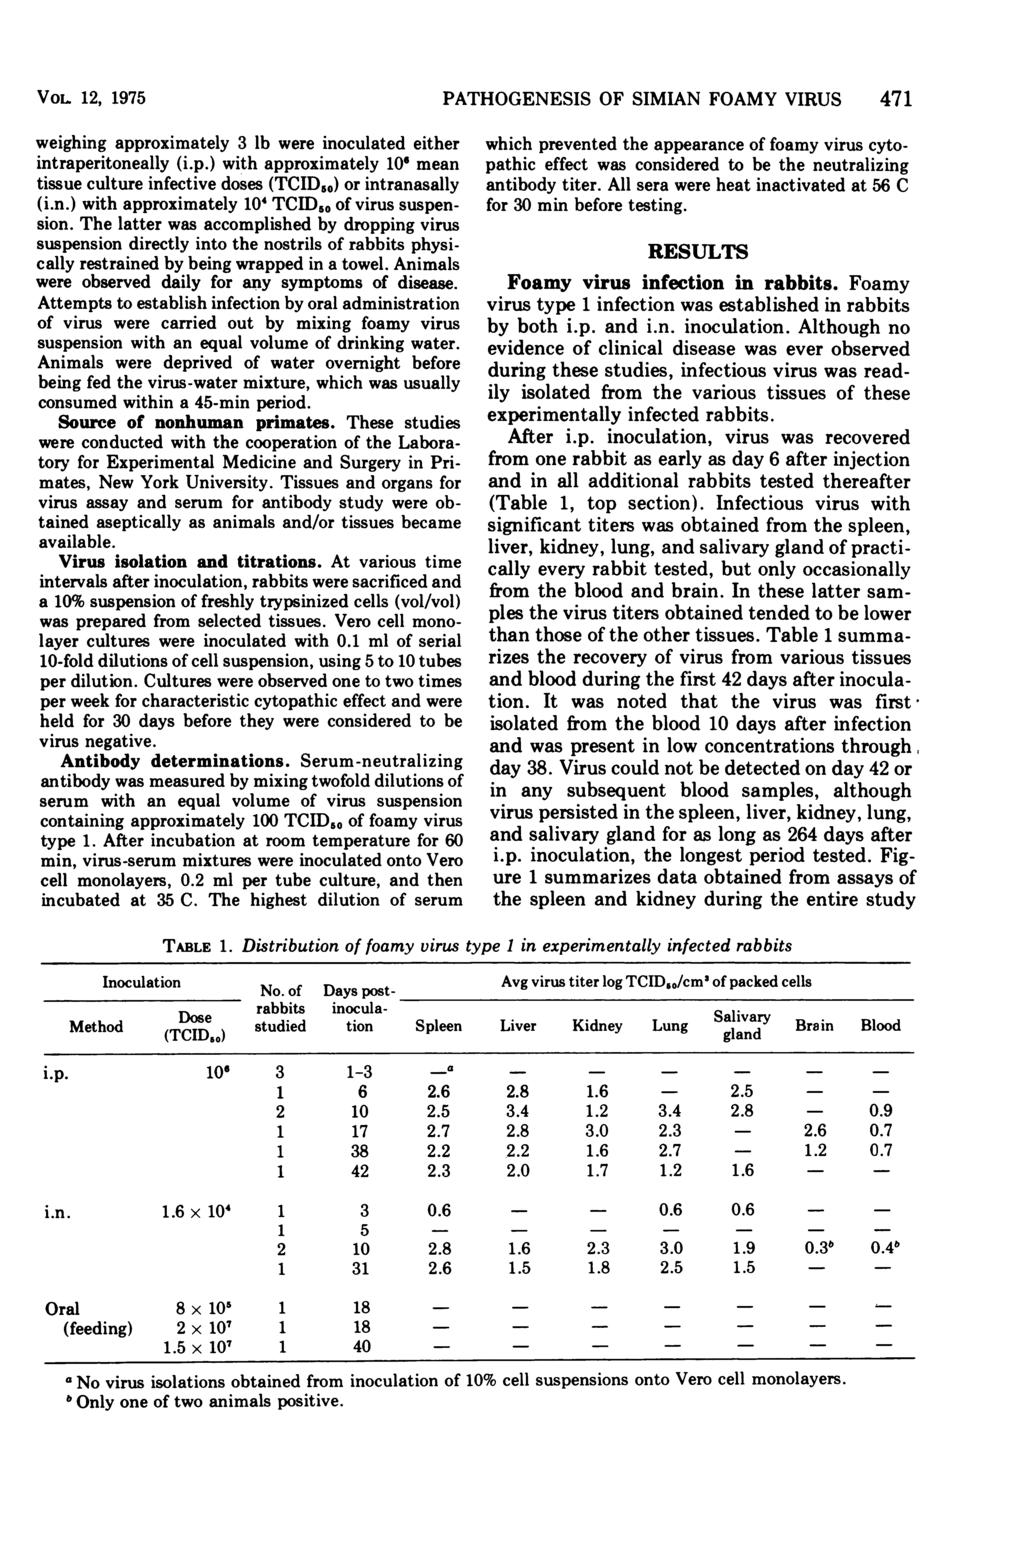 VOL 12, 1975 PATHOGENESIS OF SIMIAN FOAMY VIRUS 471 weighing approximately 3 lb were inoculated either intraperitoneally (i.p.) with approximately 106 mean tissue culture infective doses (TCID56) or intranasally (i.